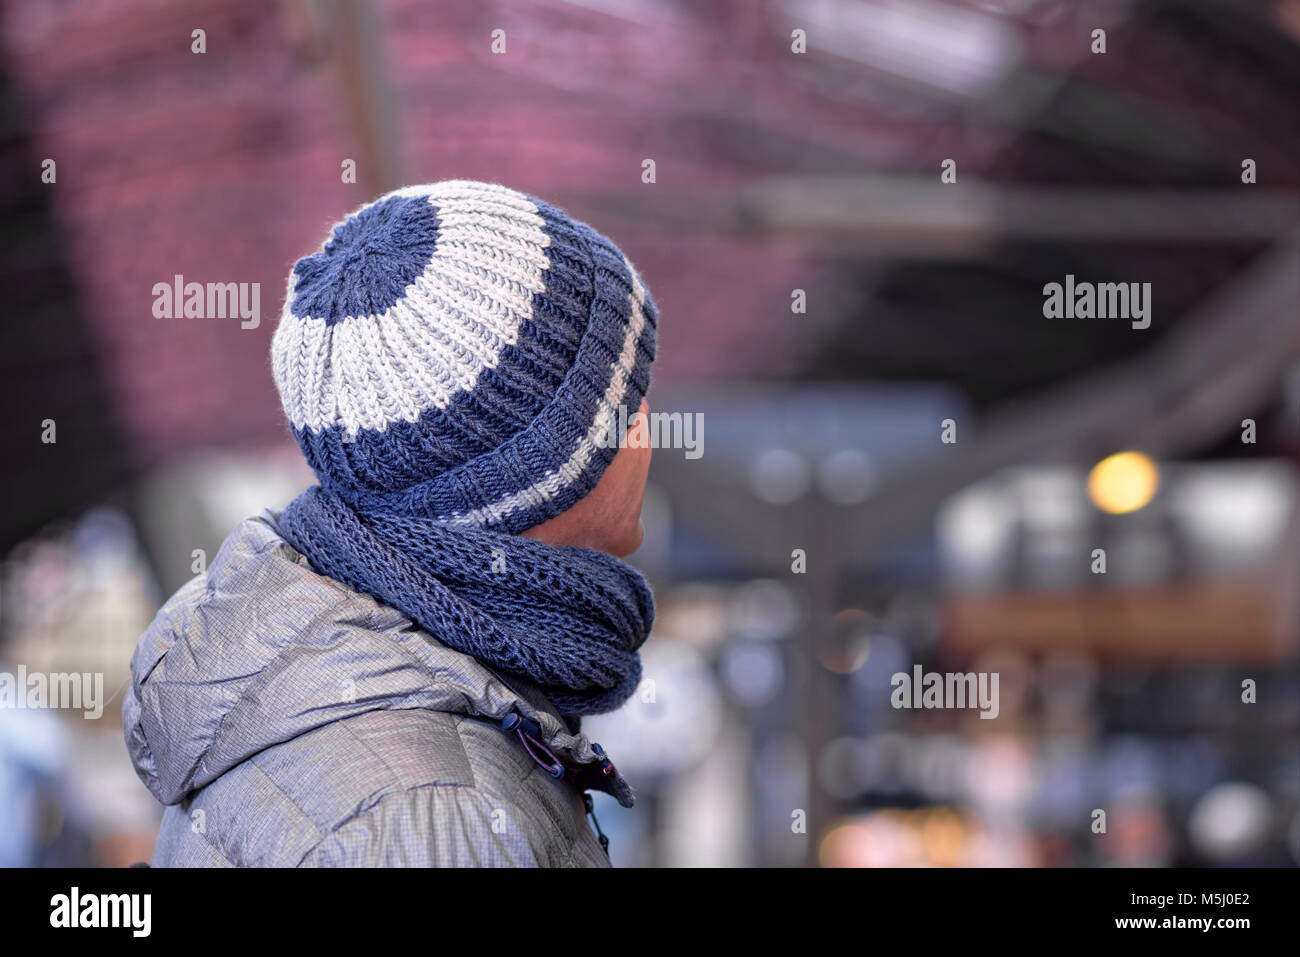 Man in knit hat and snood Stock Photo